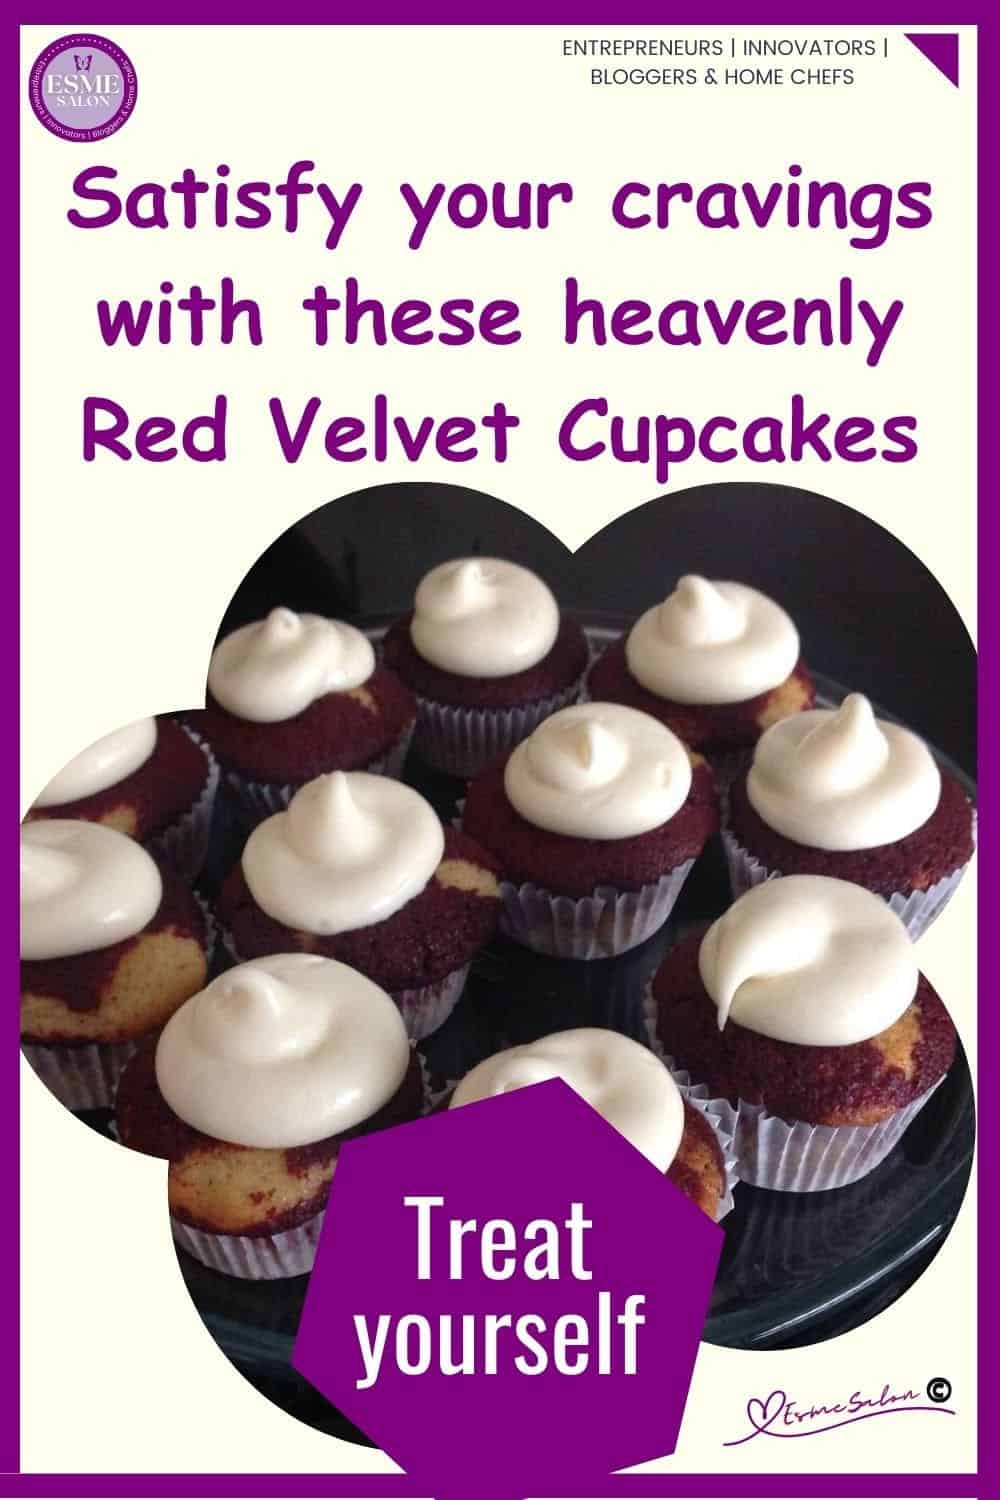 an image of Red Velvet Cupcakes with cream topping